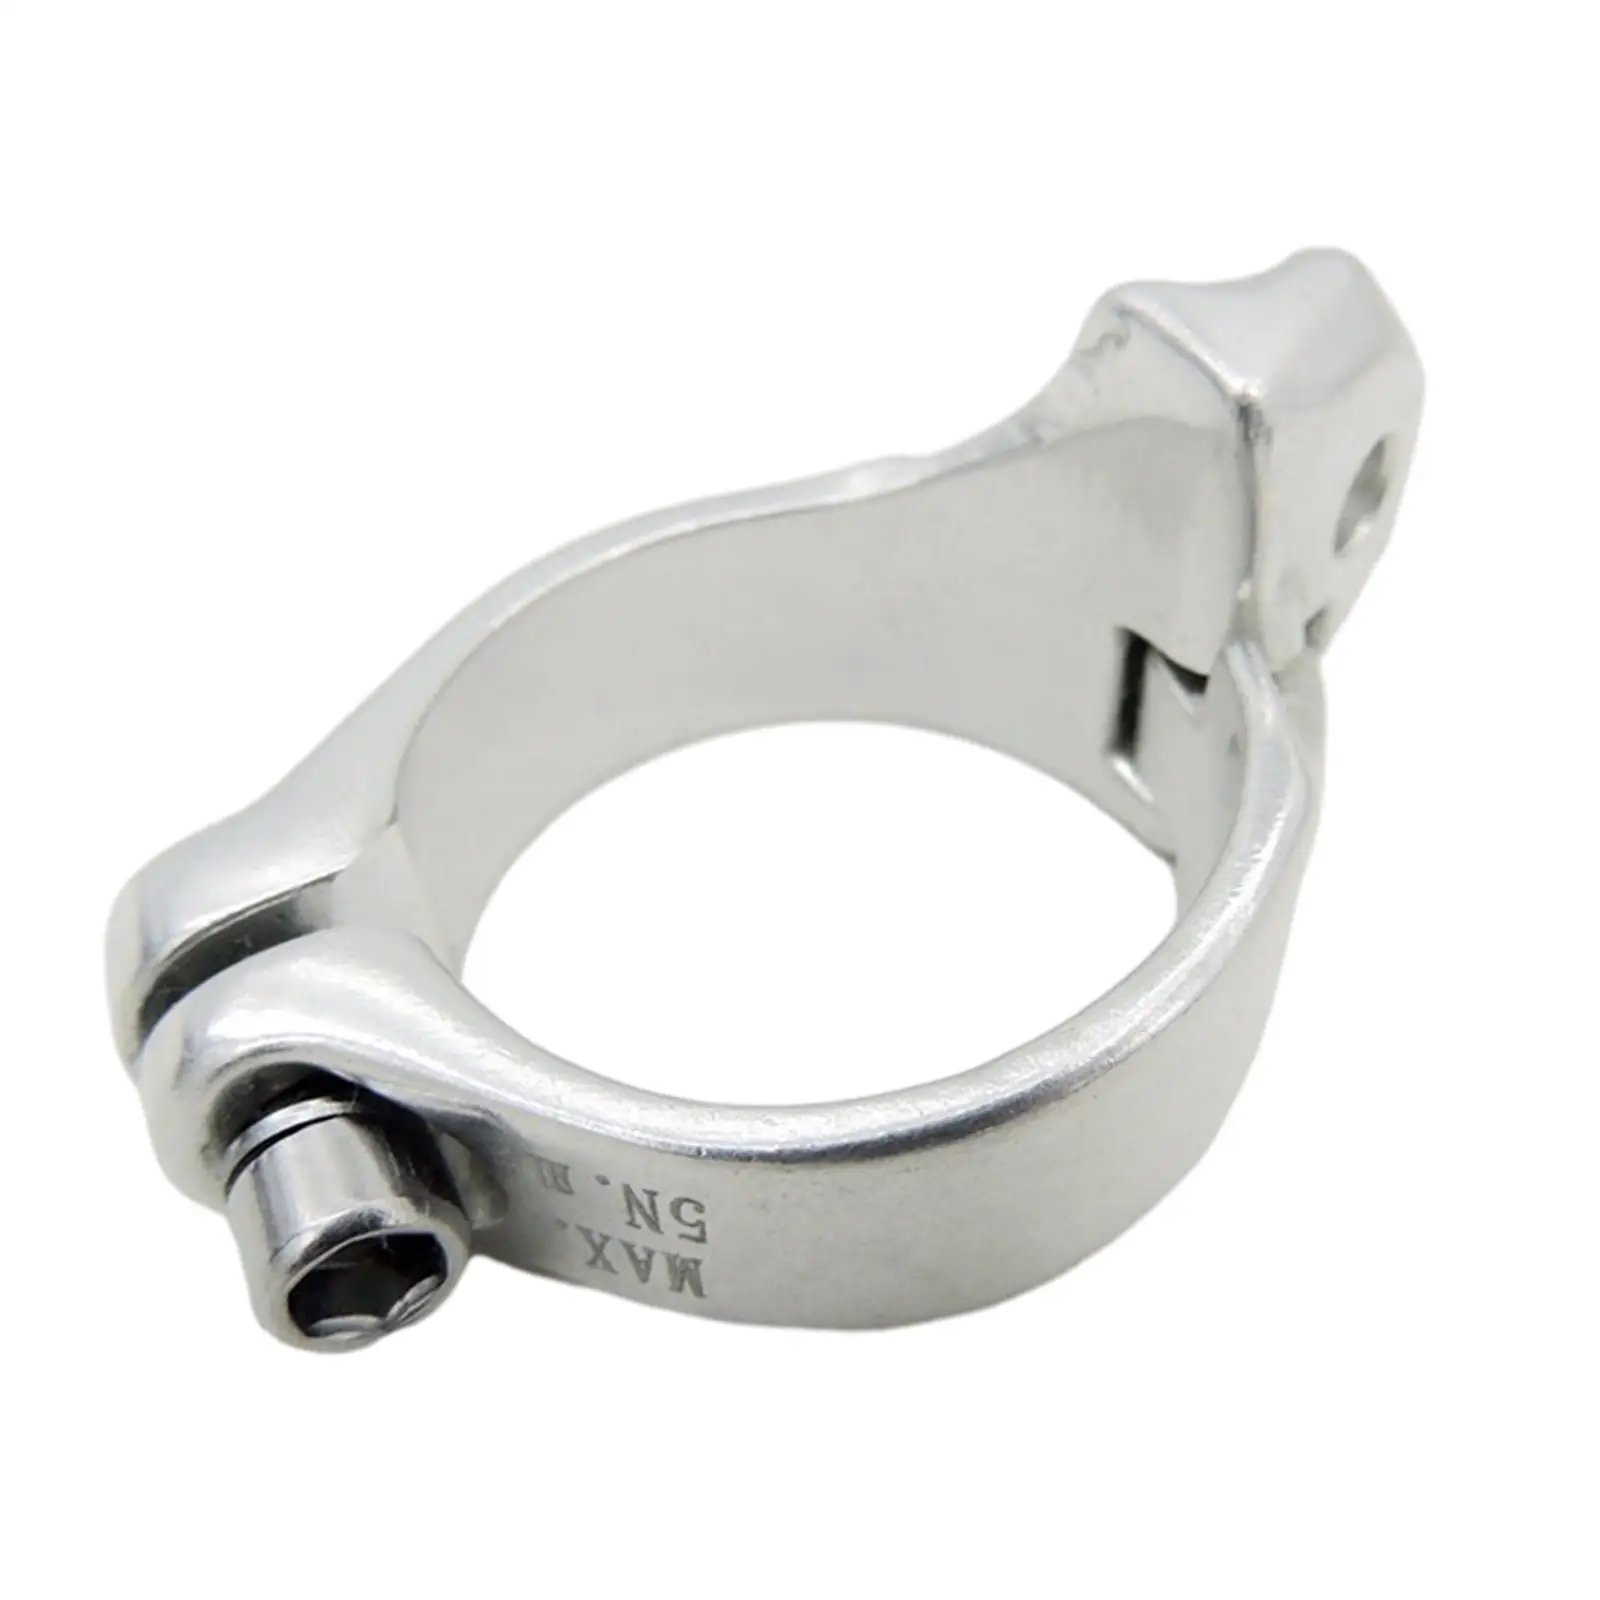 Bicycle Front Derailleur Clamp Aluminium Alloy Convertor Universal Bike Derailleur Clamp Adapter Clip for Road or Mountain Bike